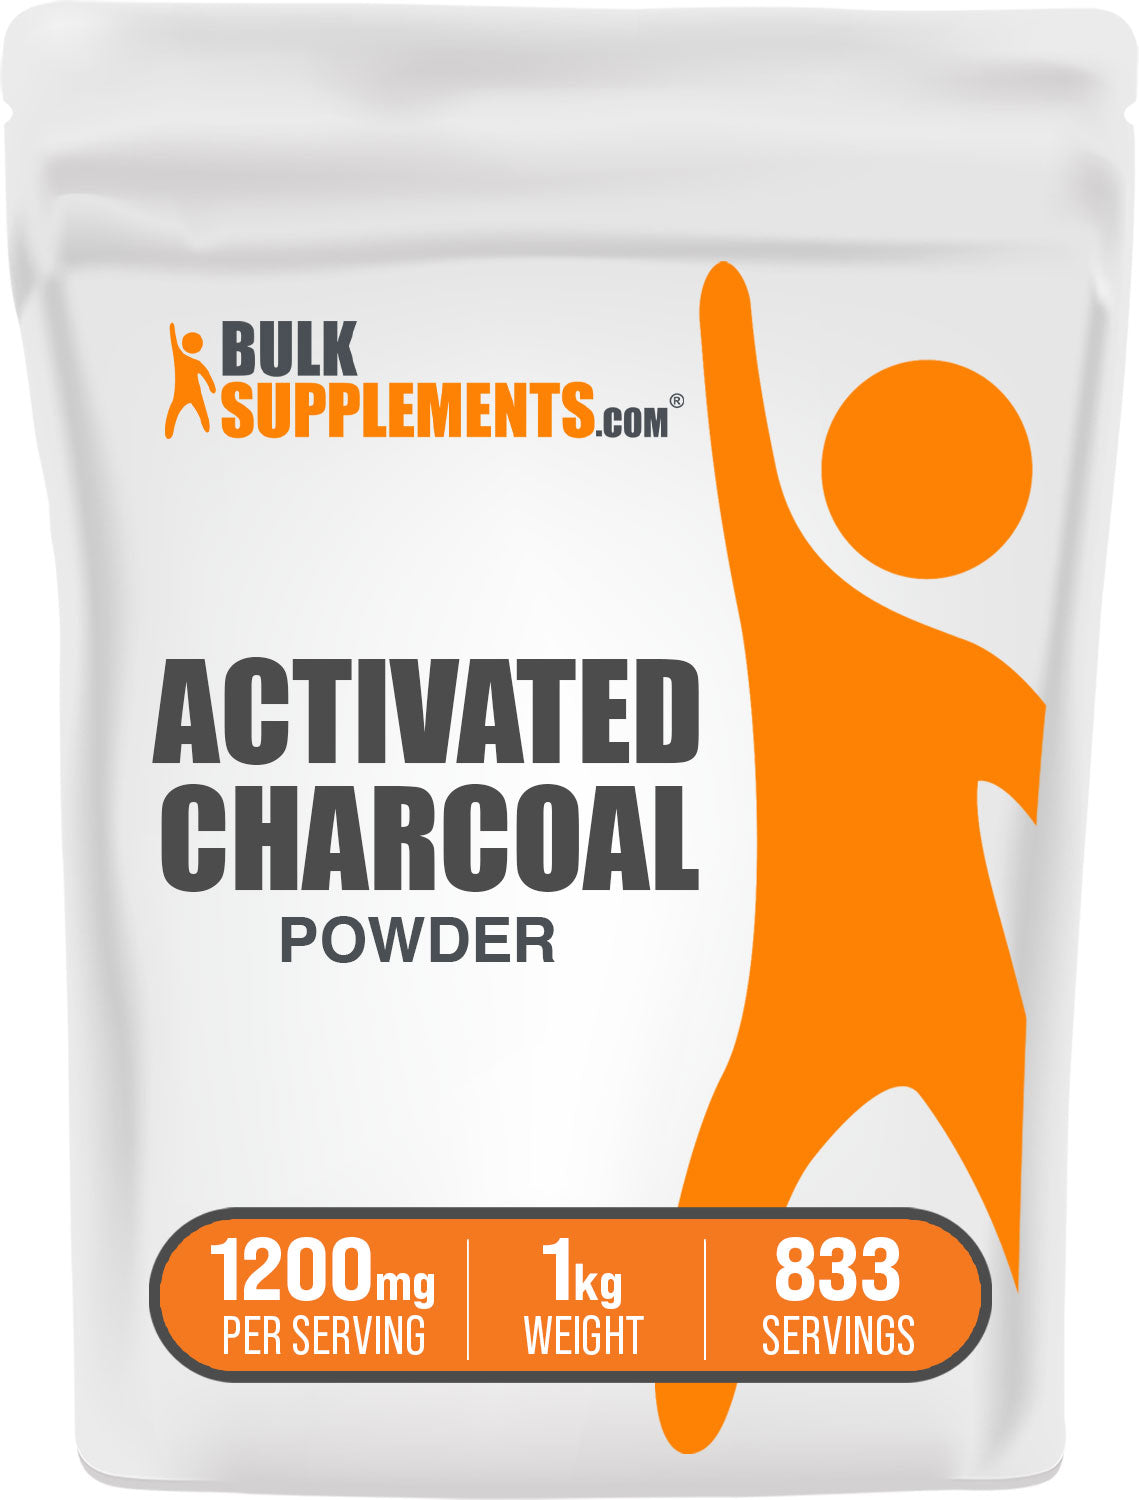 activated charcoal	powder